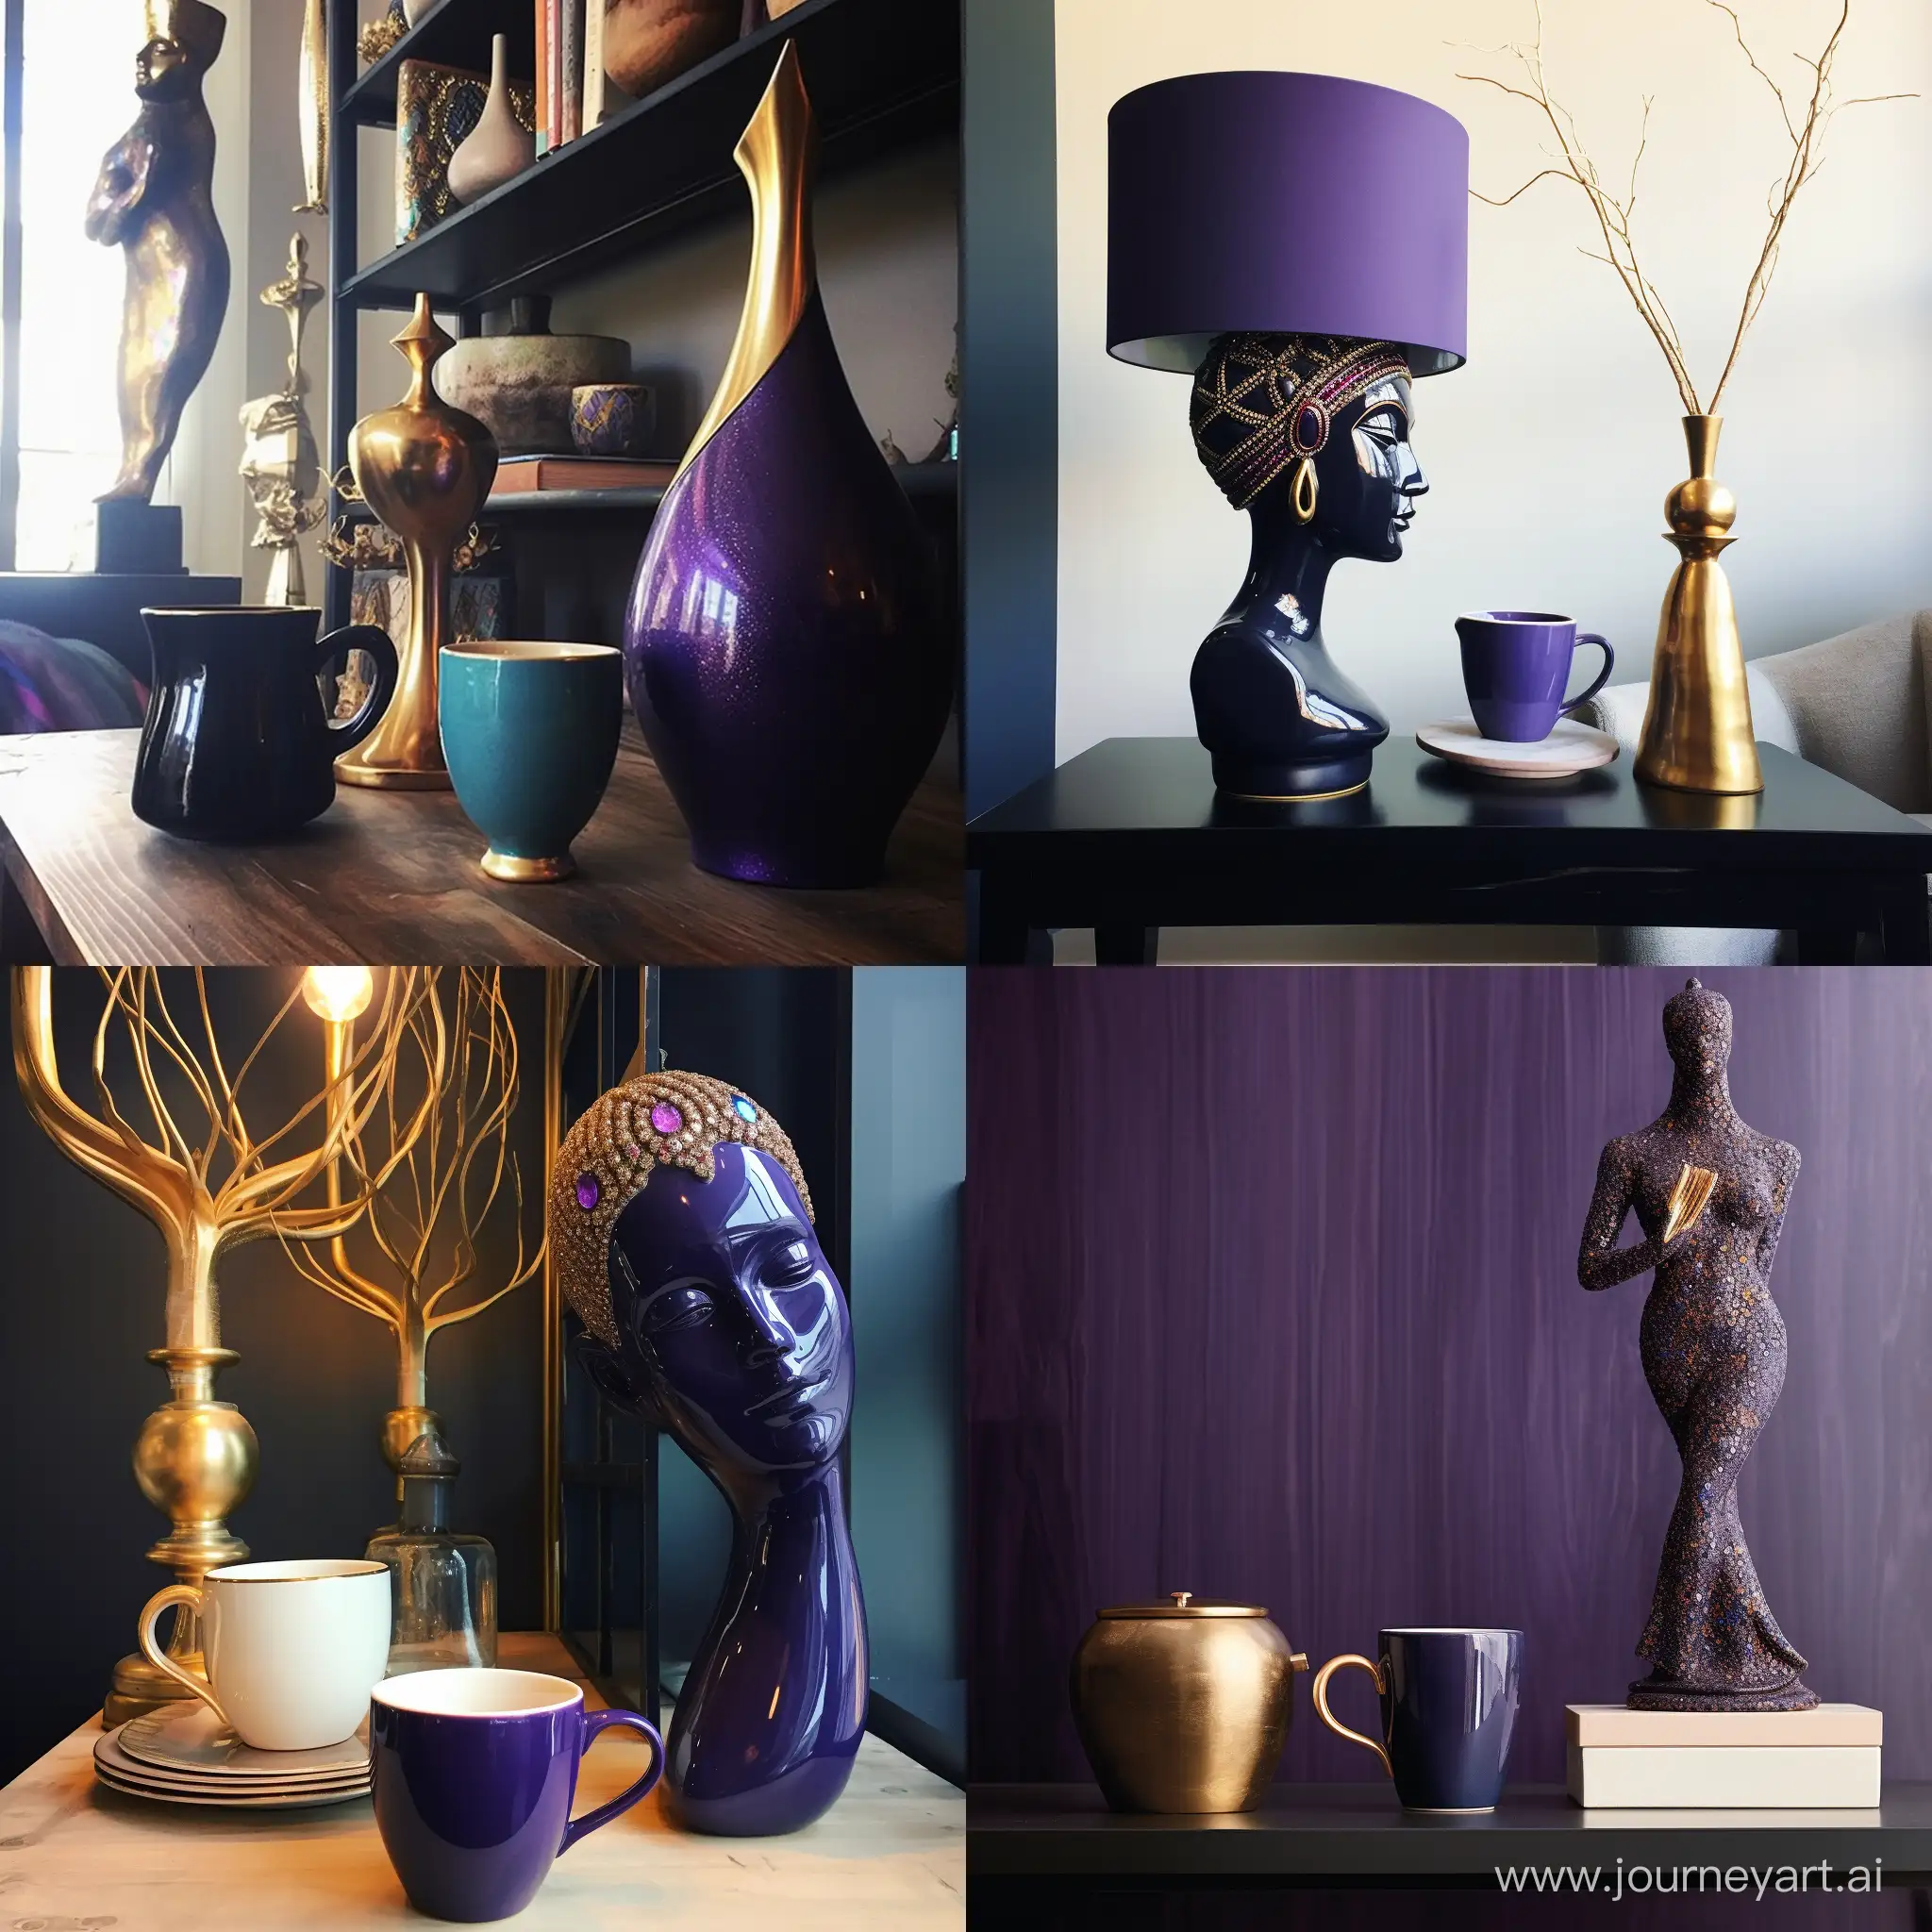 Magical-Lamp-Genie-Emerges-from-Humanshaped-Mug-with-Enchanting-Sparkles